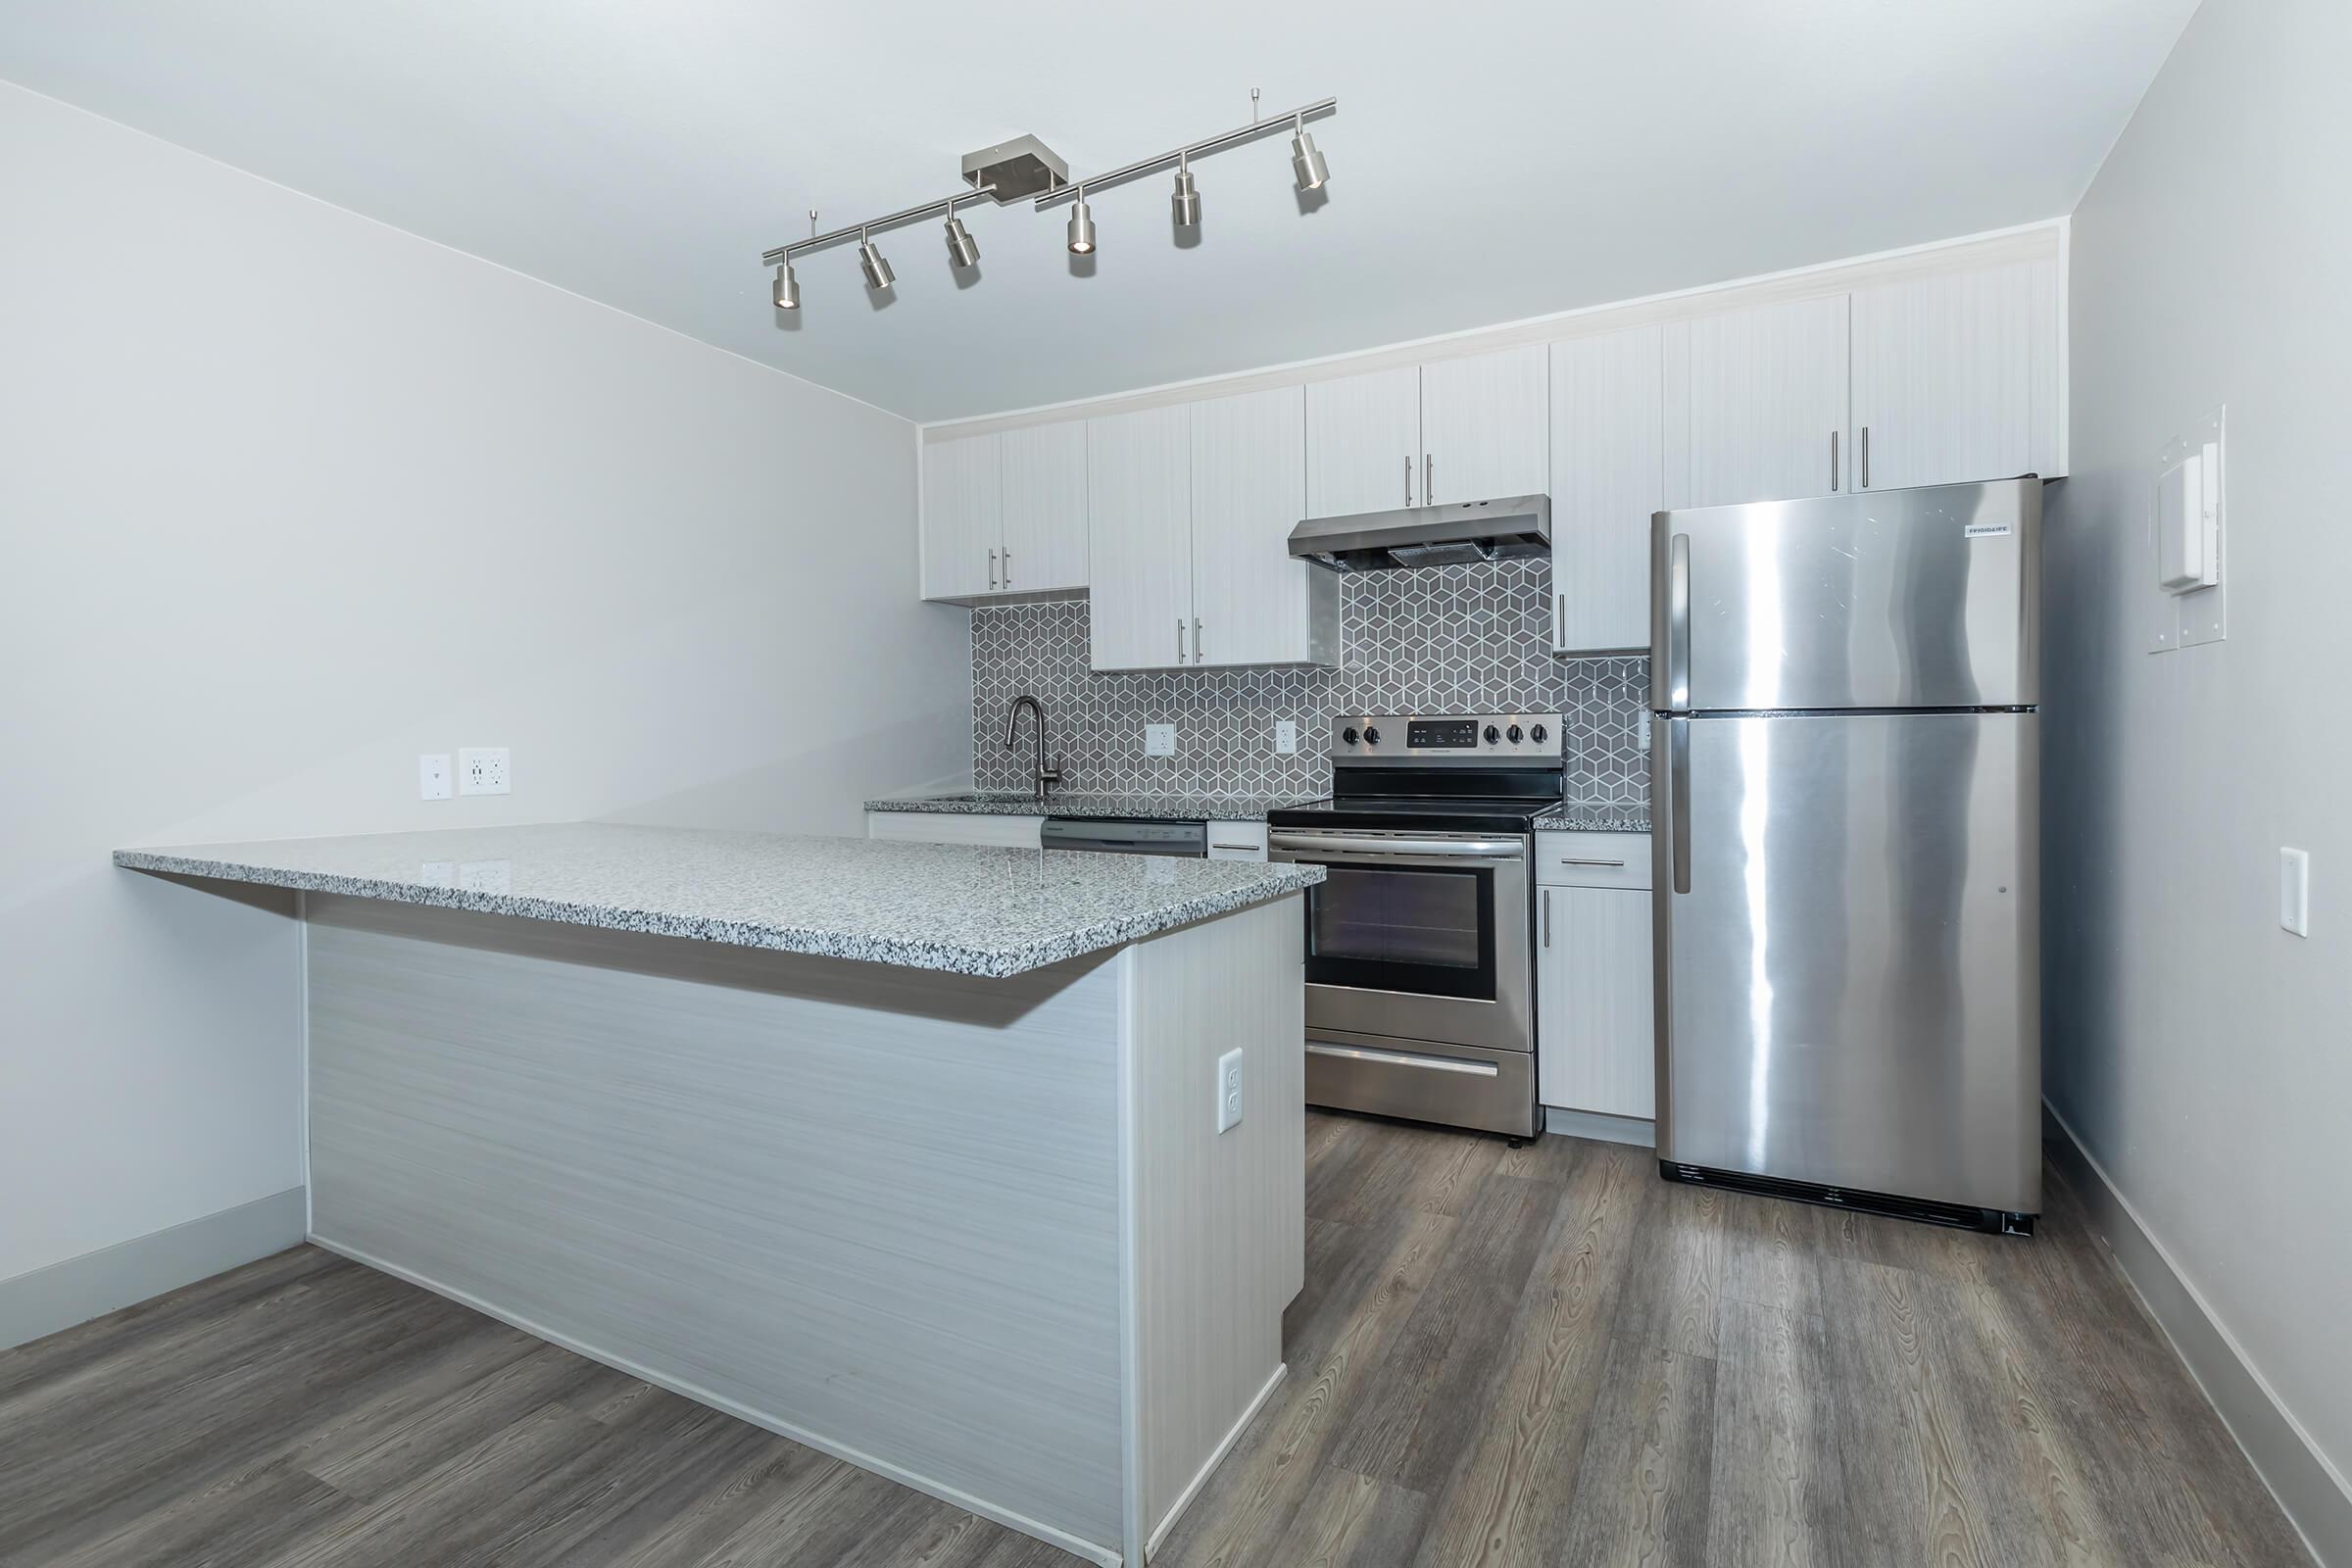 Stainless steel all electric kitchen with dining at the counter at North 49 Apartments, located in Colorado Springs, CO